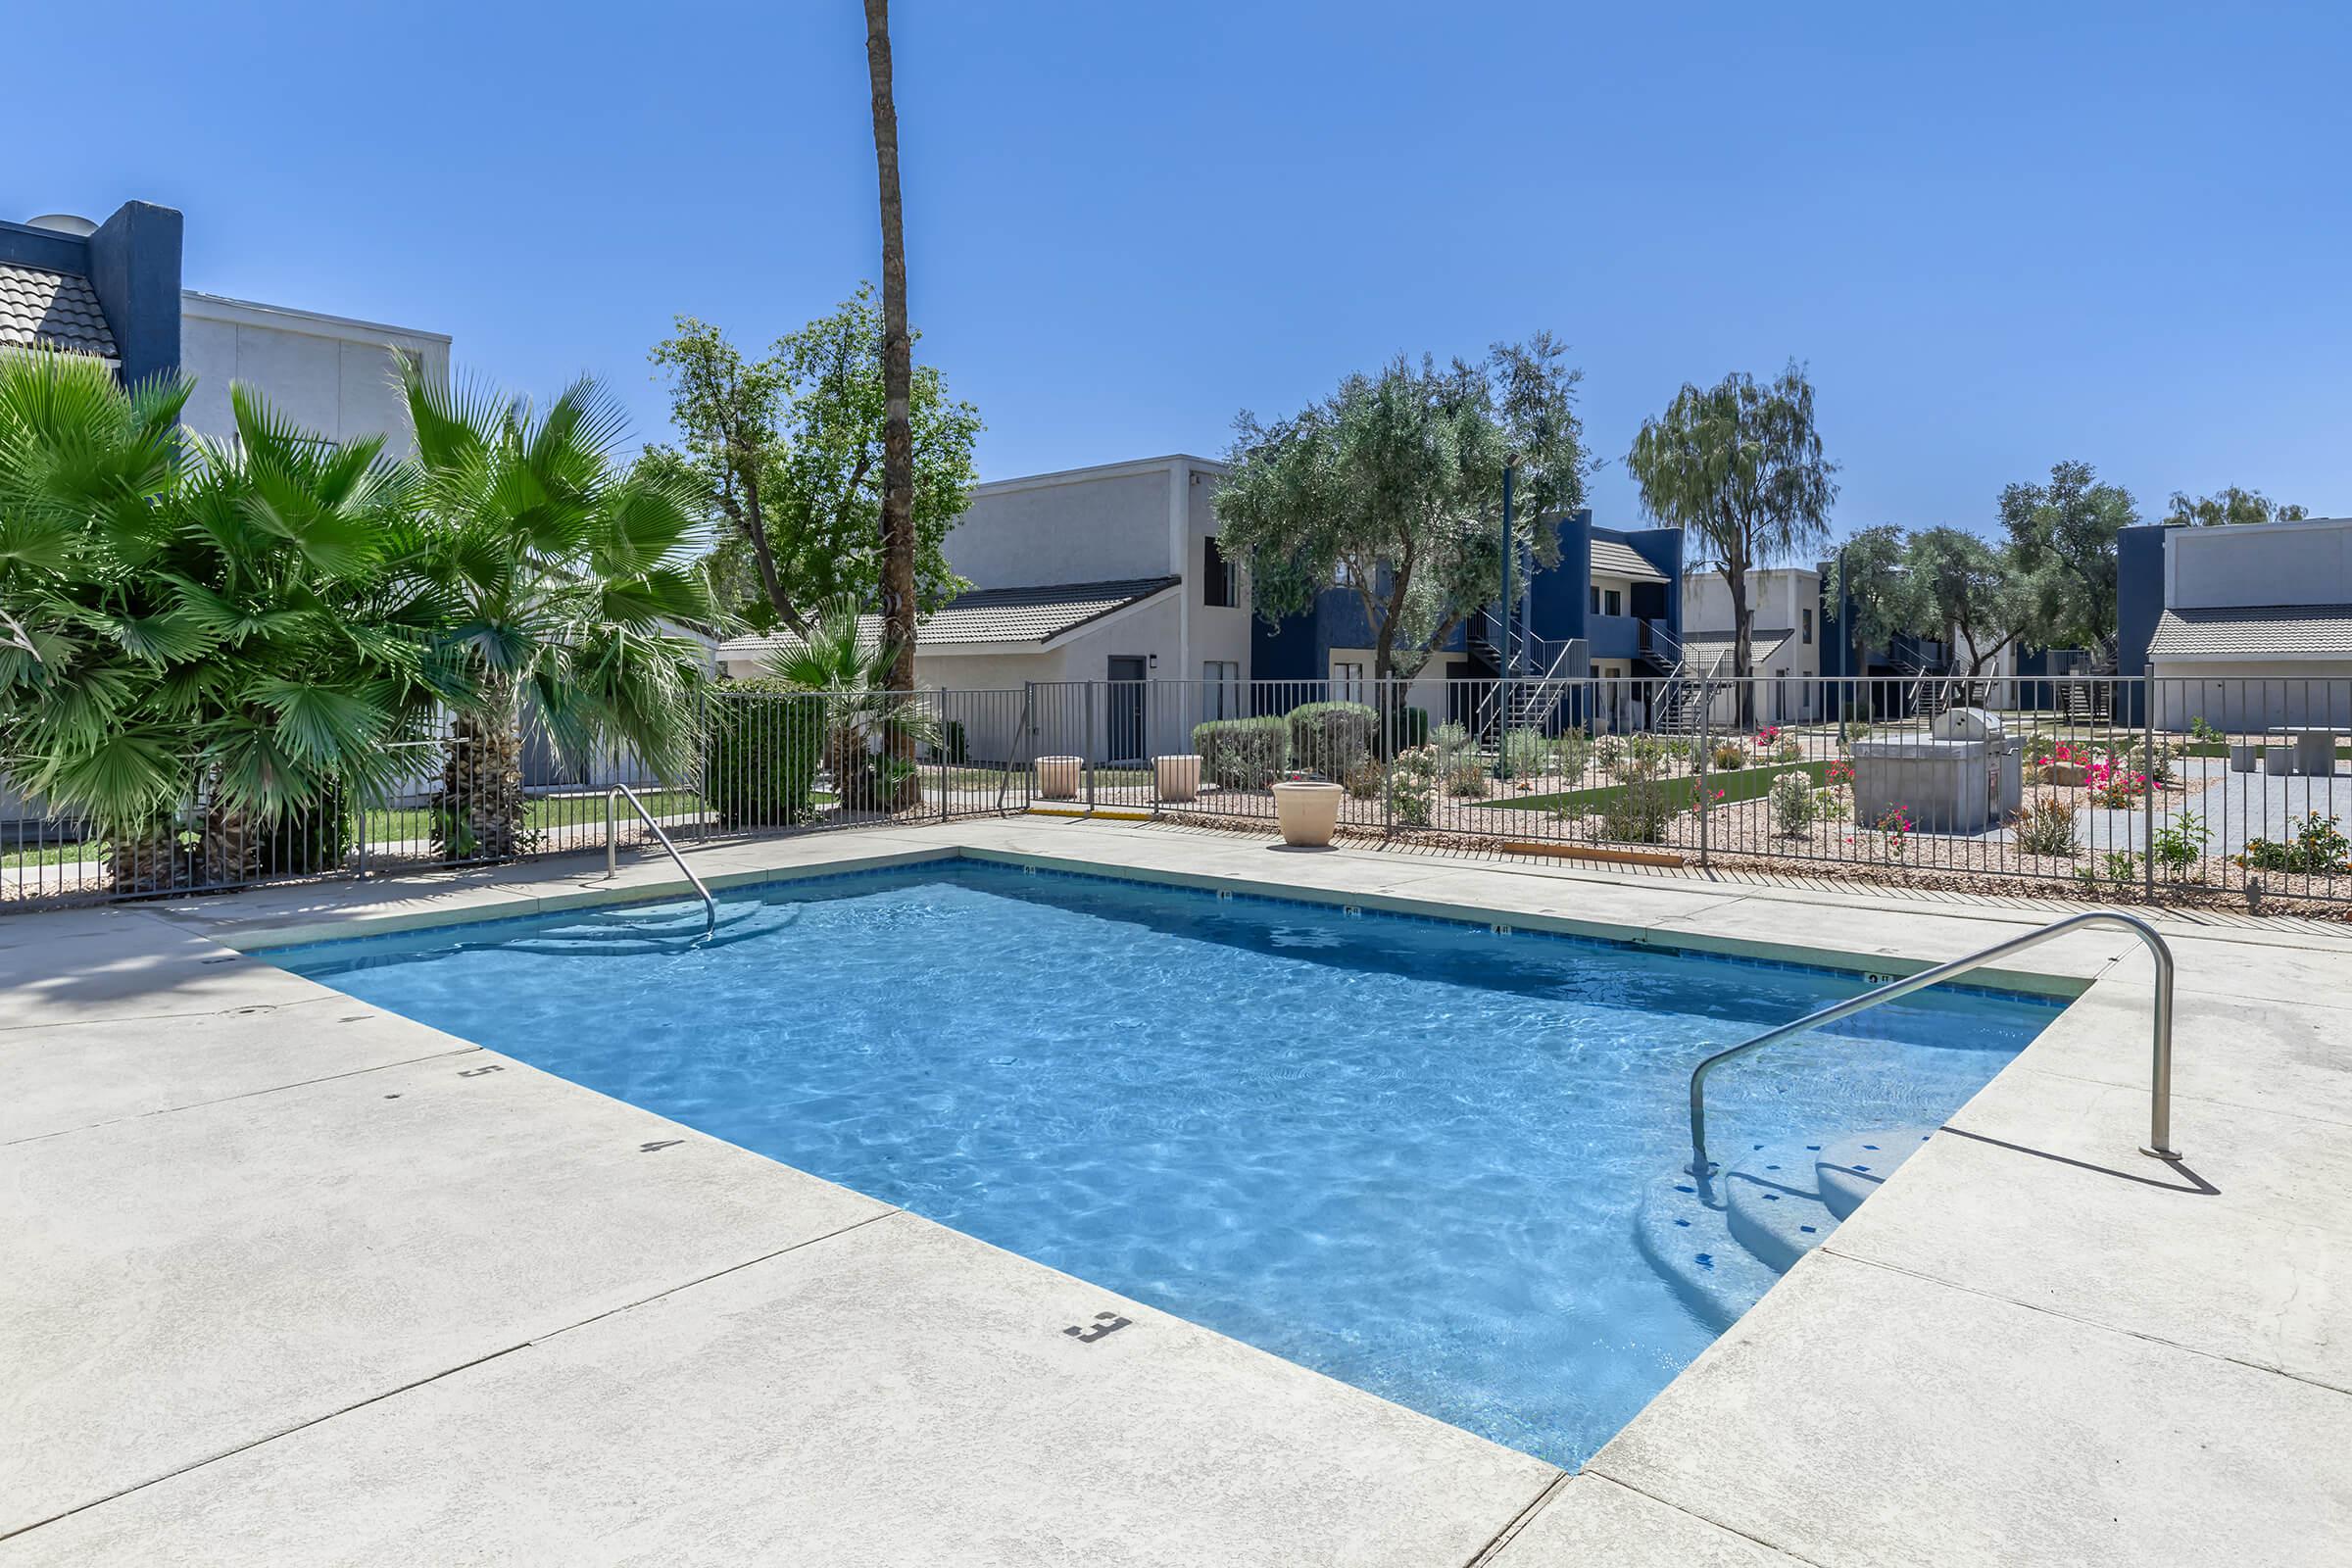 Rectangular outdoor pool surrounded by small palm trees at Rise Camelback